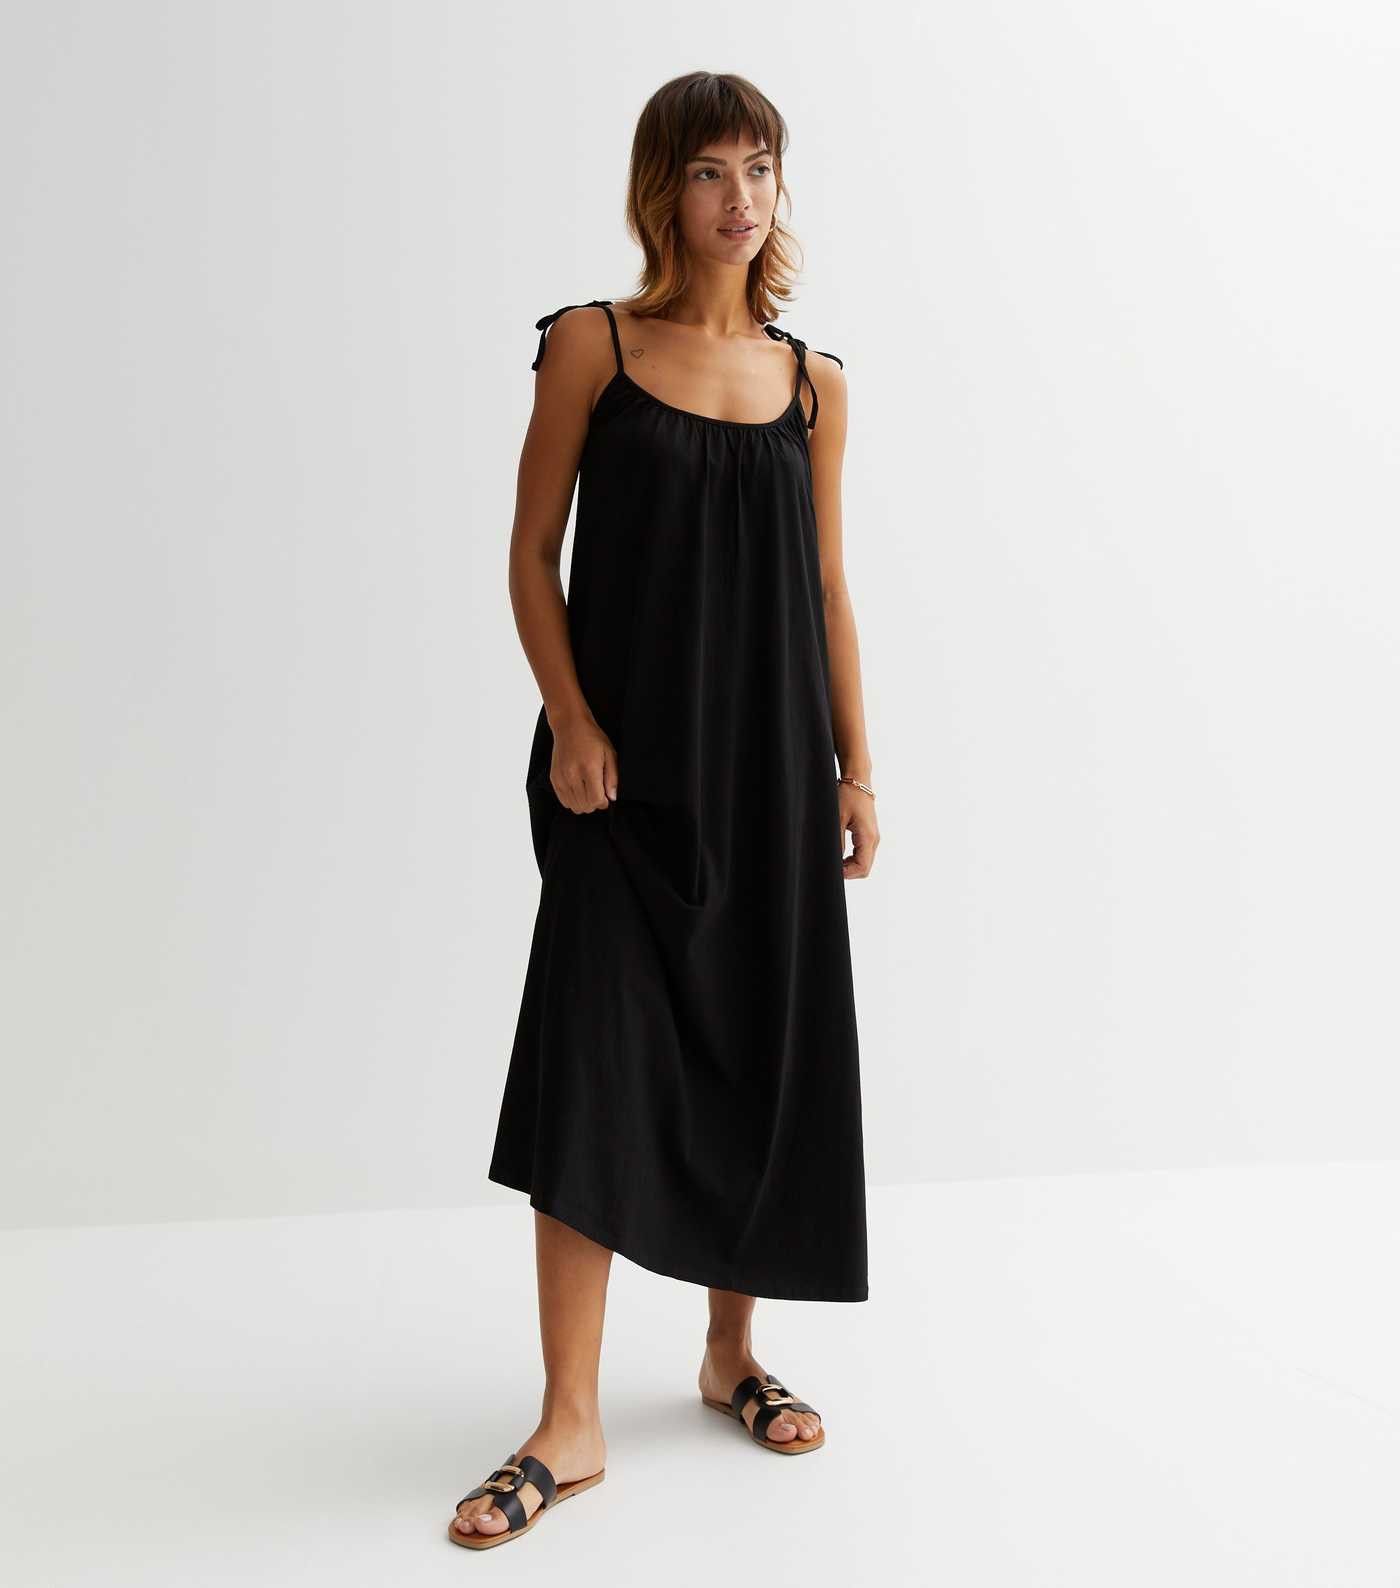 Black Strappy Midi Smock Dress
						
						Add to Saved Items
						Remove from Saved Items | New Look (UK)